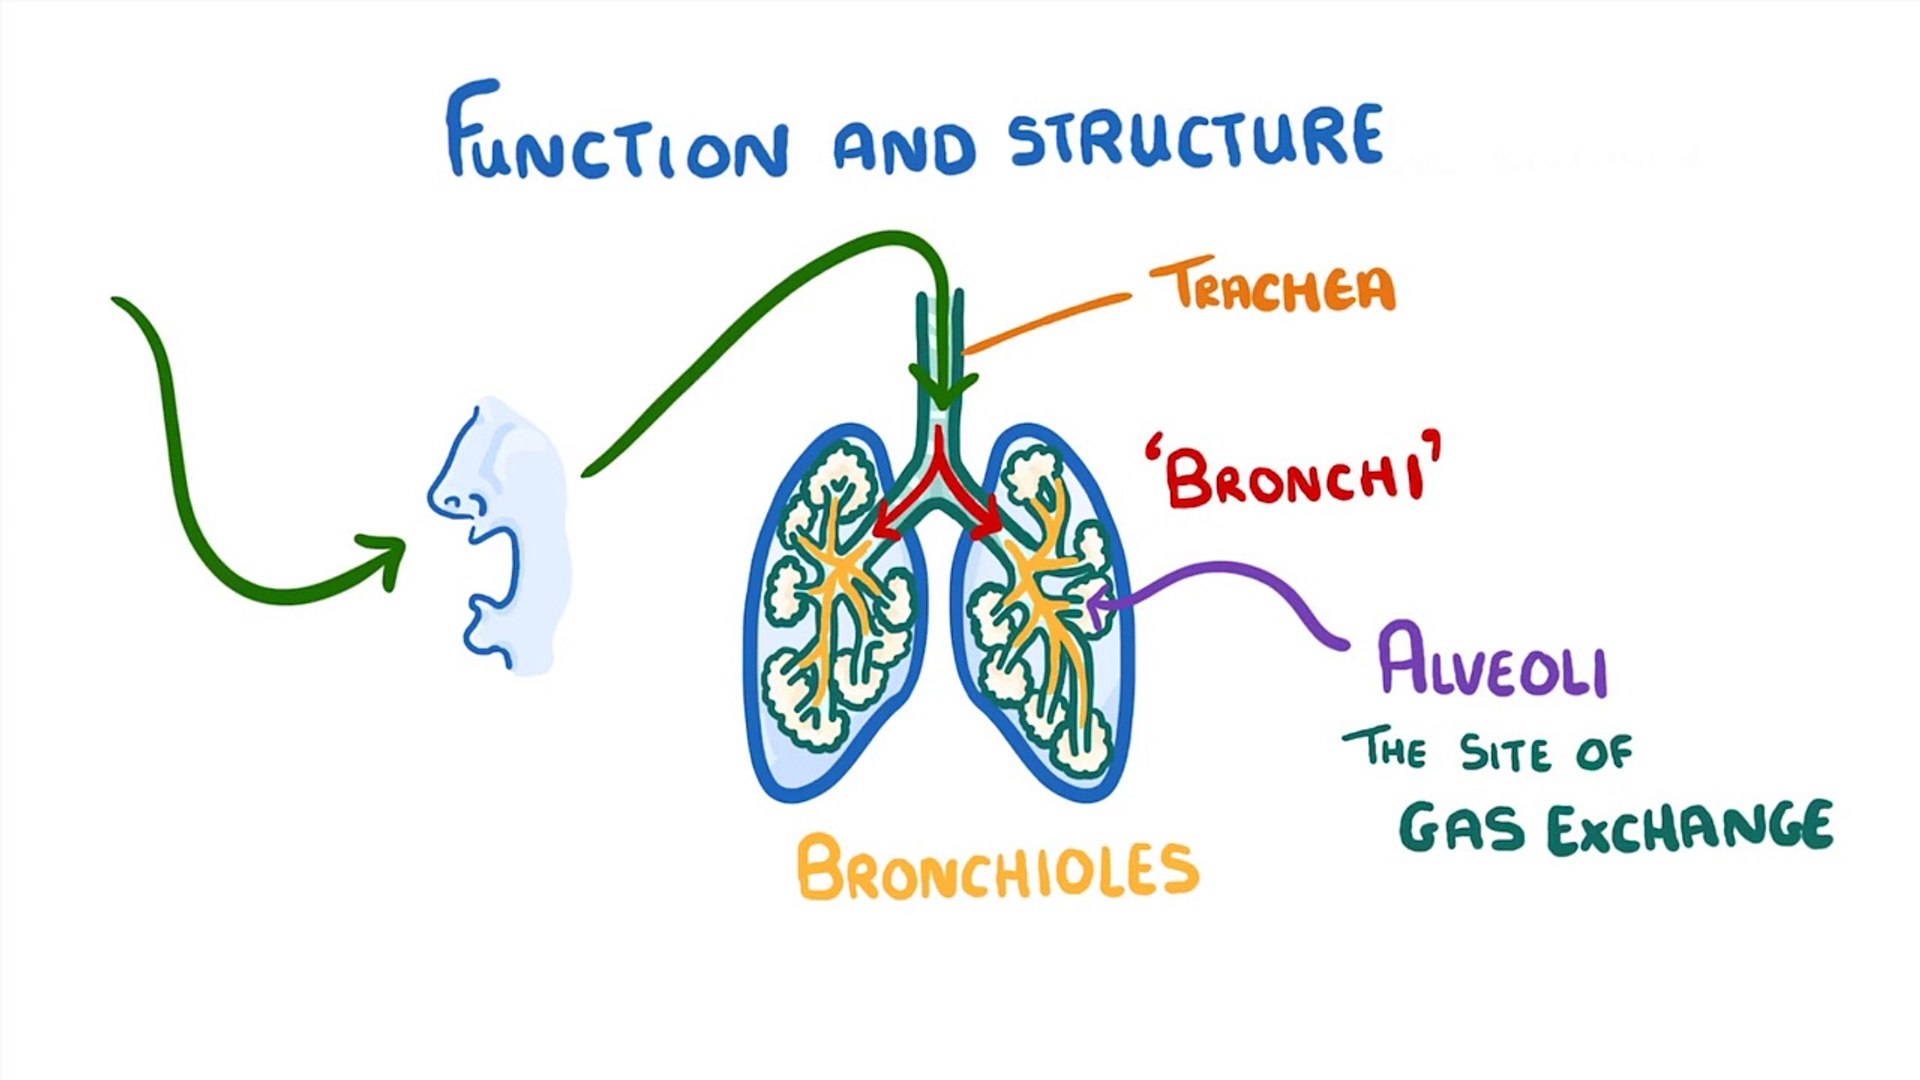 Biology - Gas Exchange and Lungs